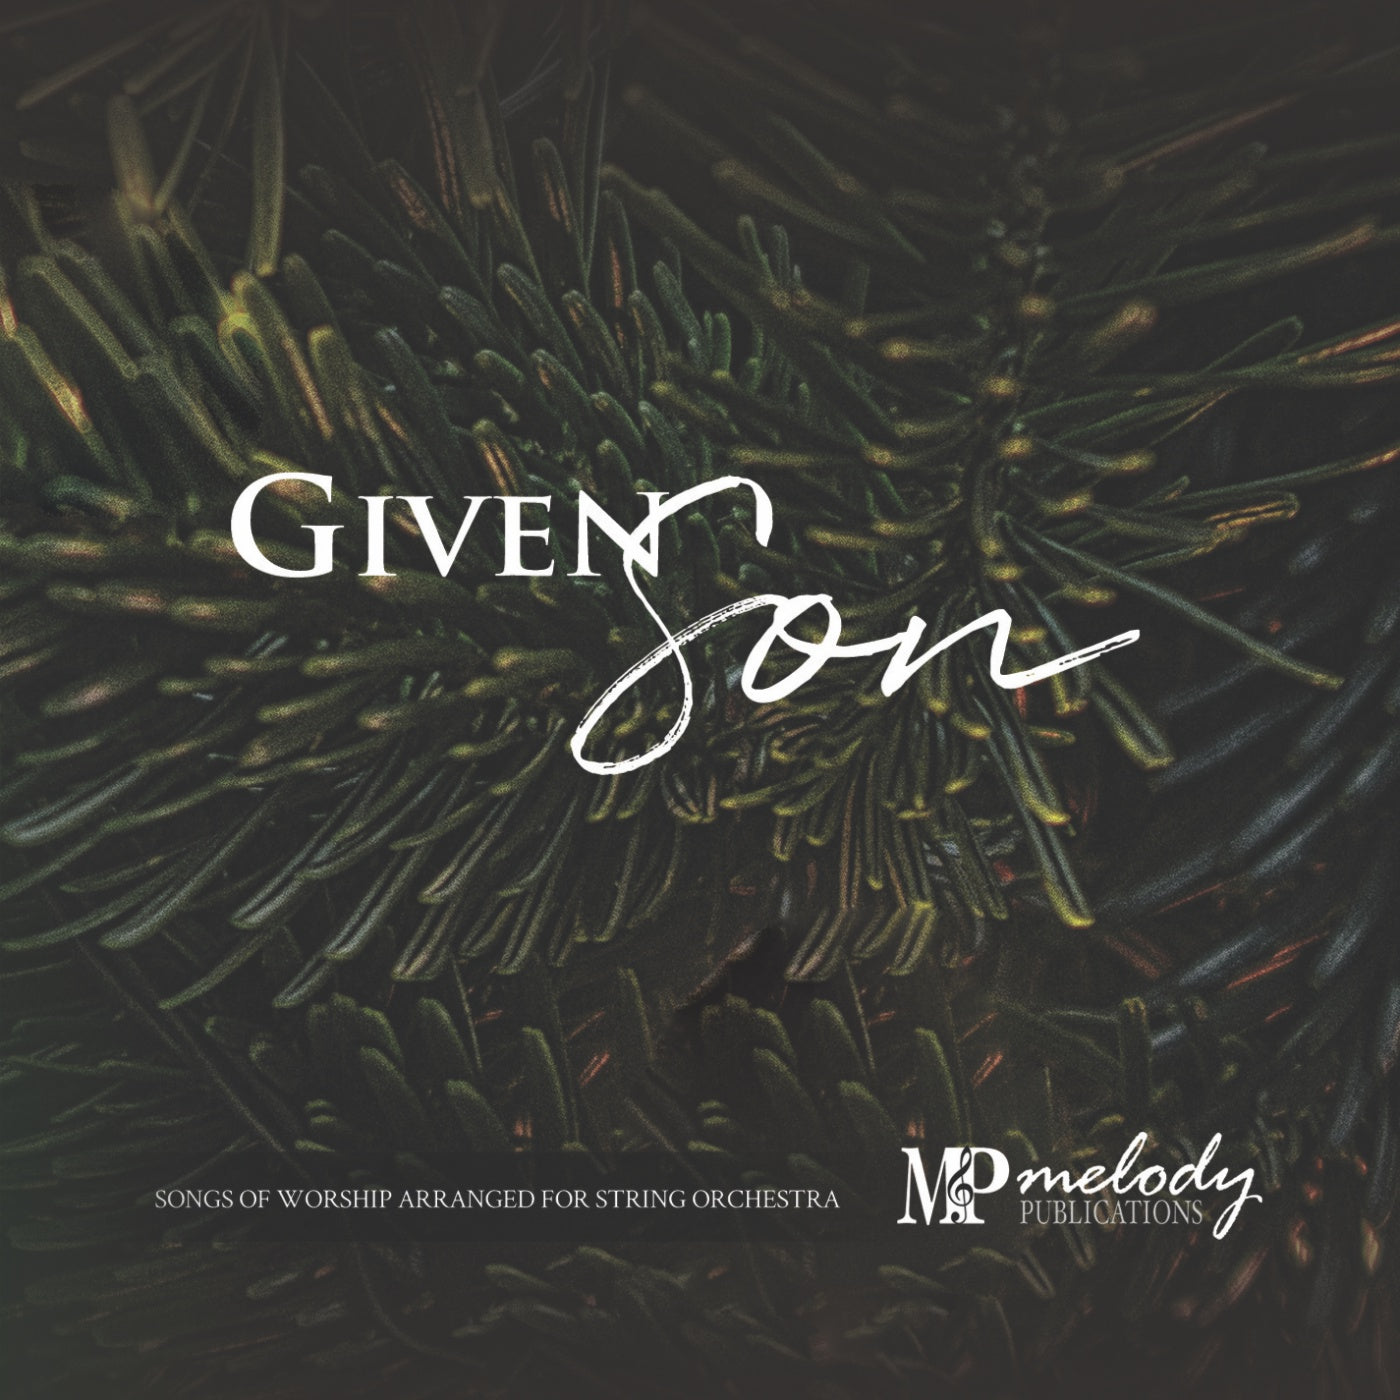 Given Son (CD)